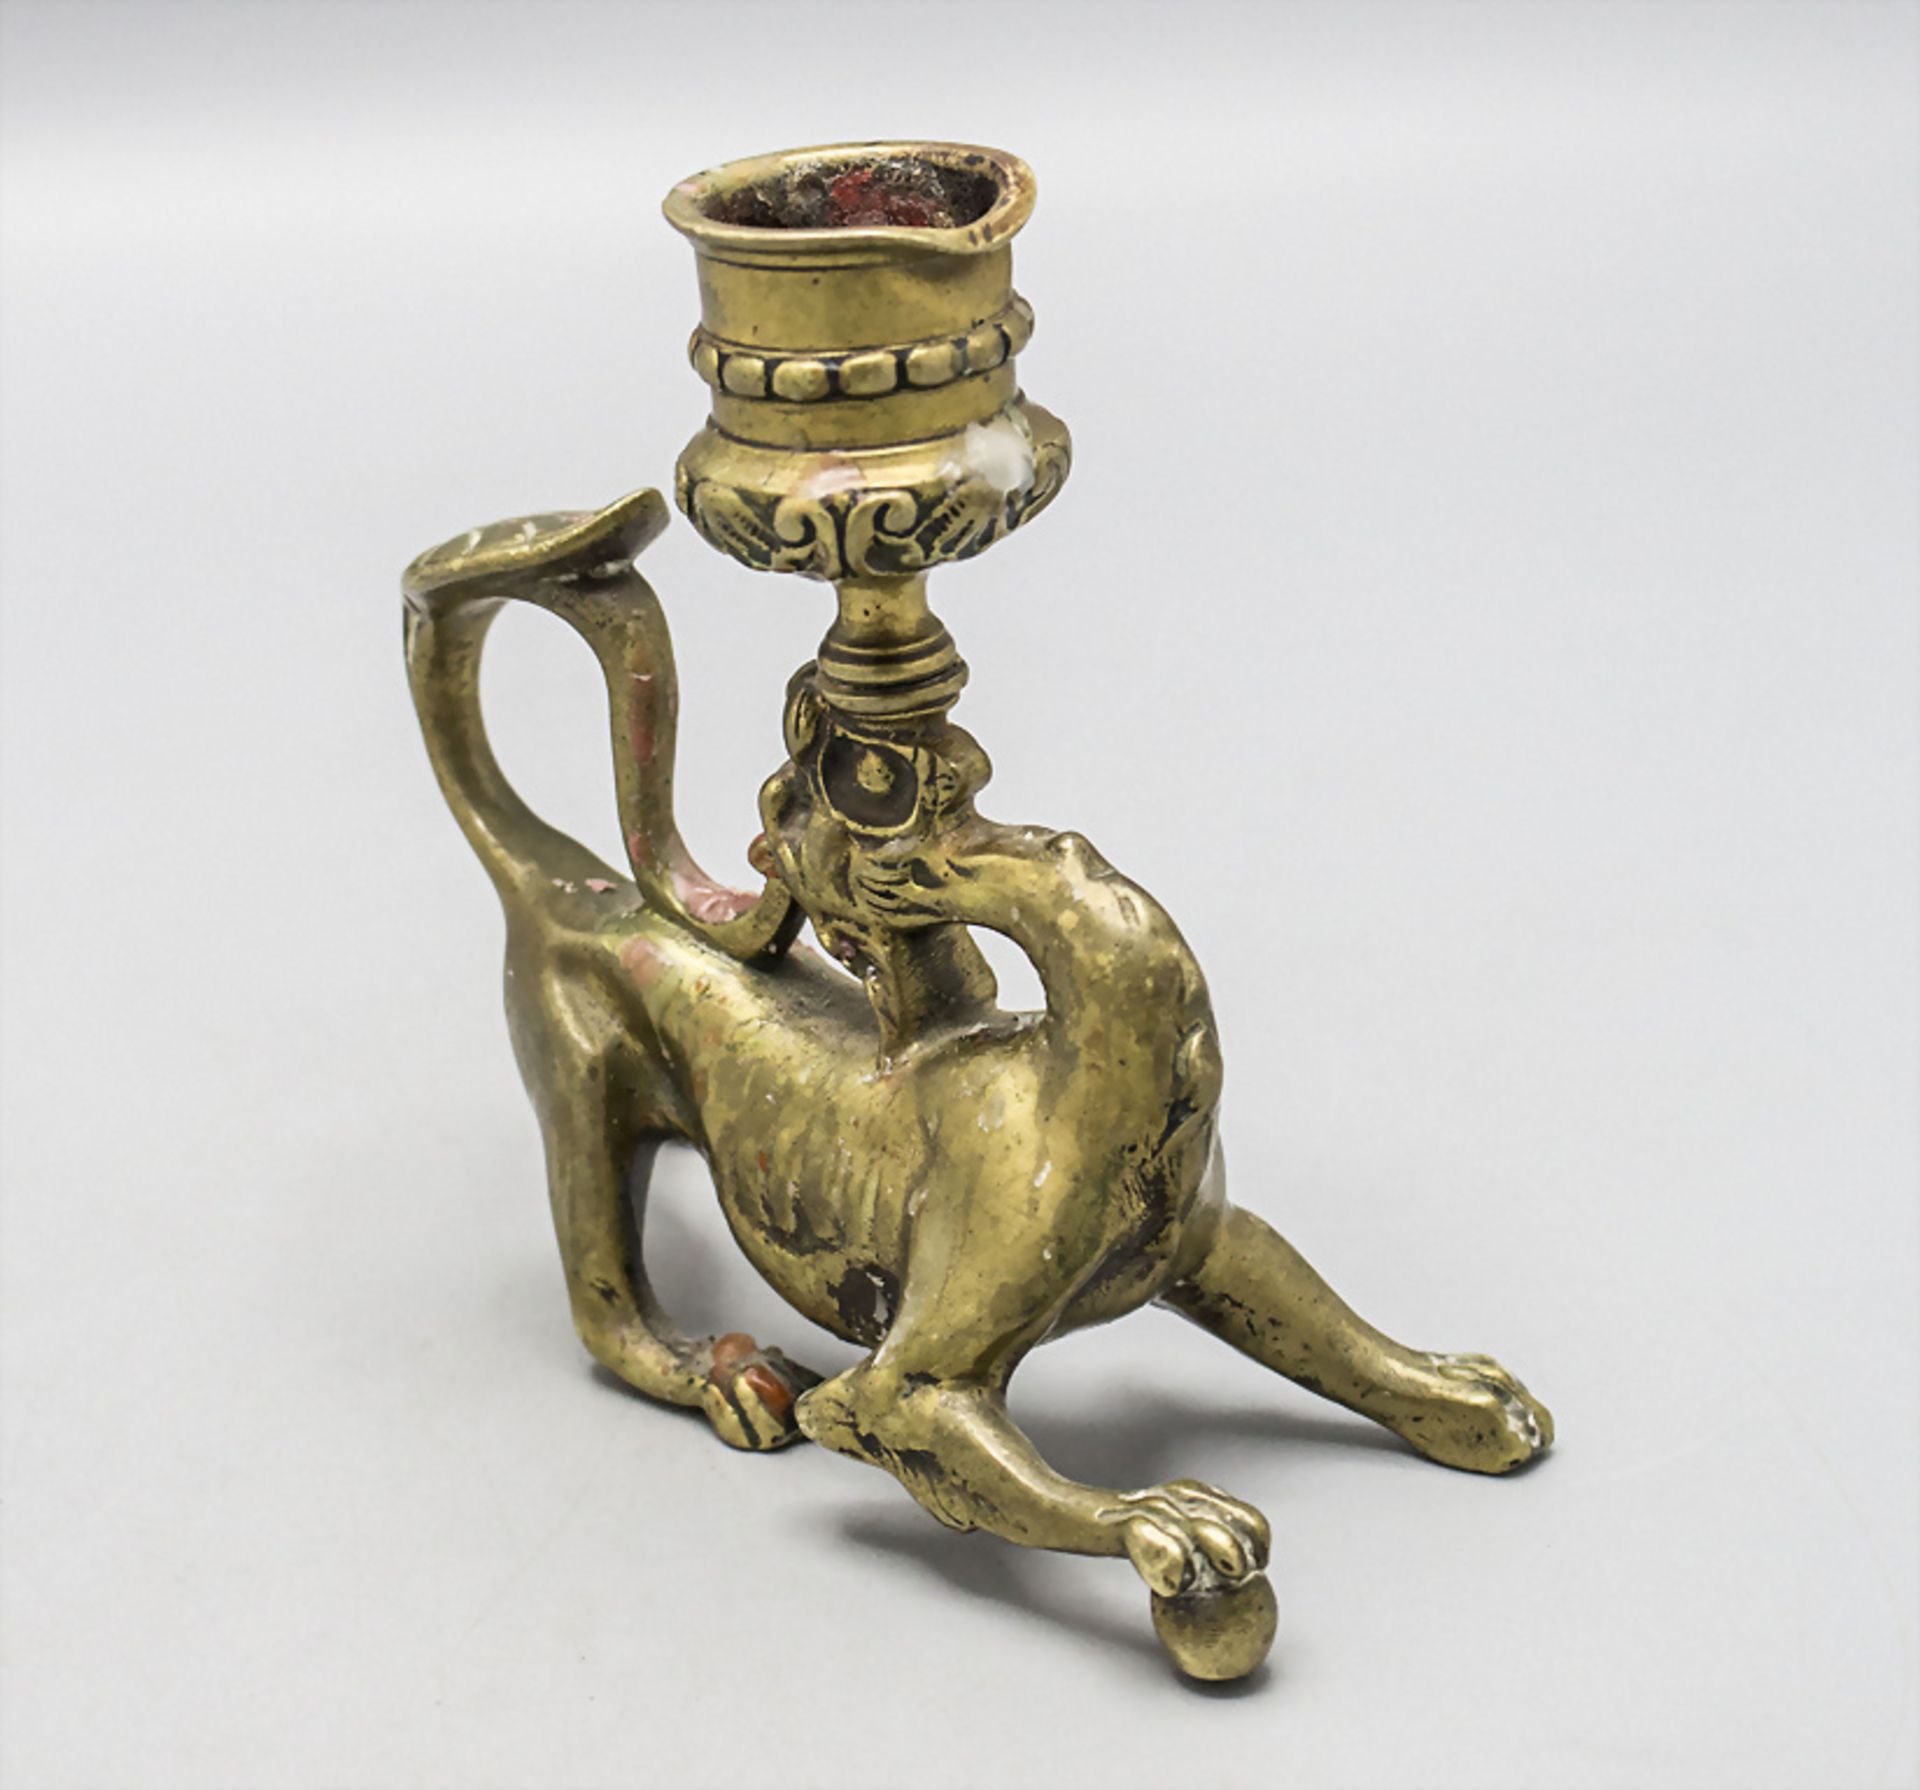 Bronzeleuchter 'Drache' / A bronze candle holder with a dragon, Frankreich, 19. Jh. - Image 3 of 5